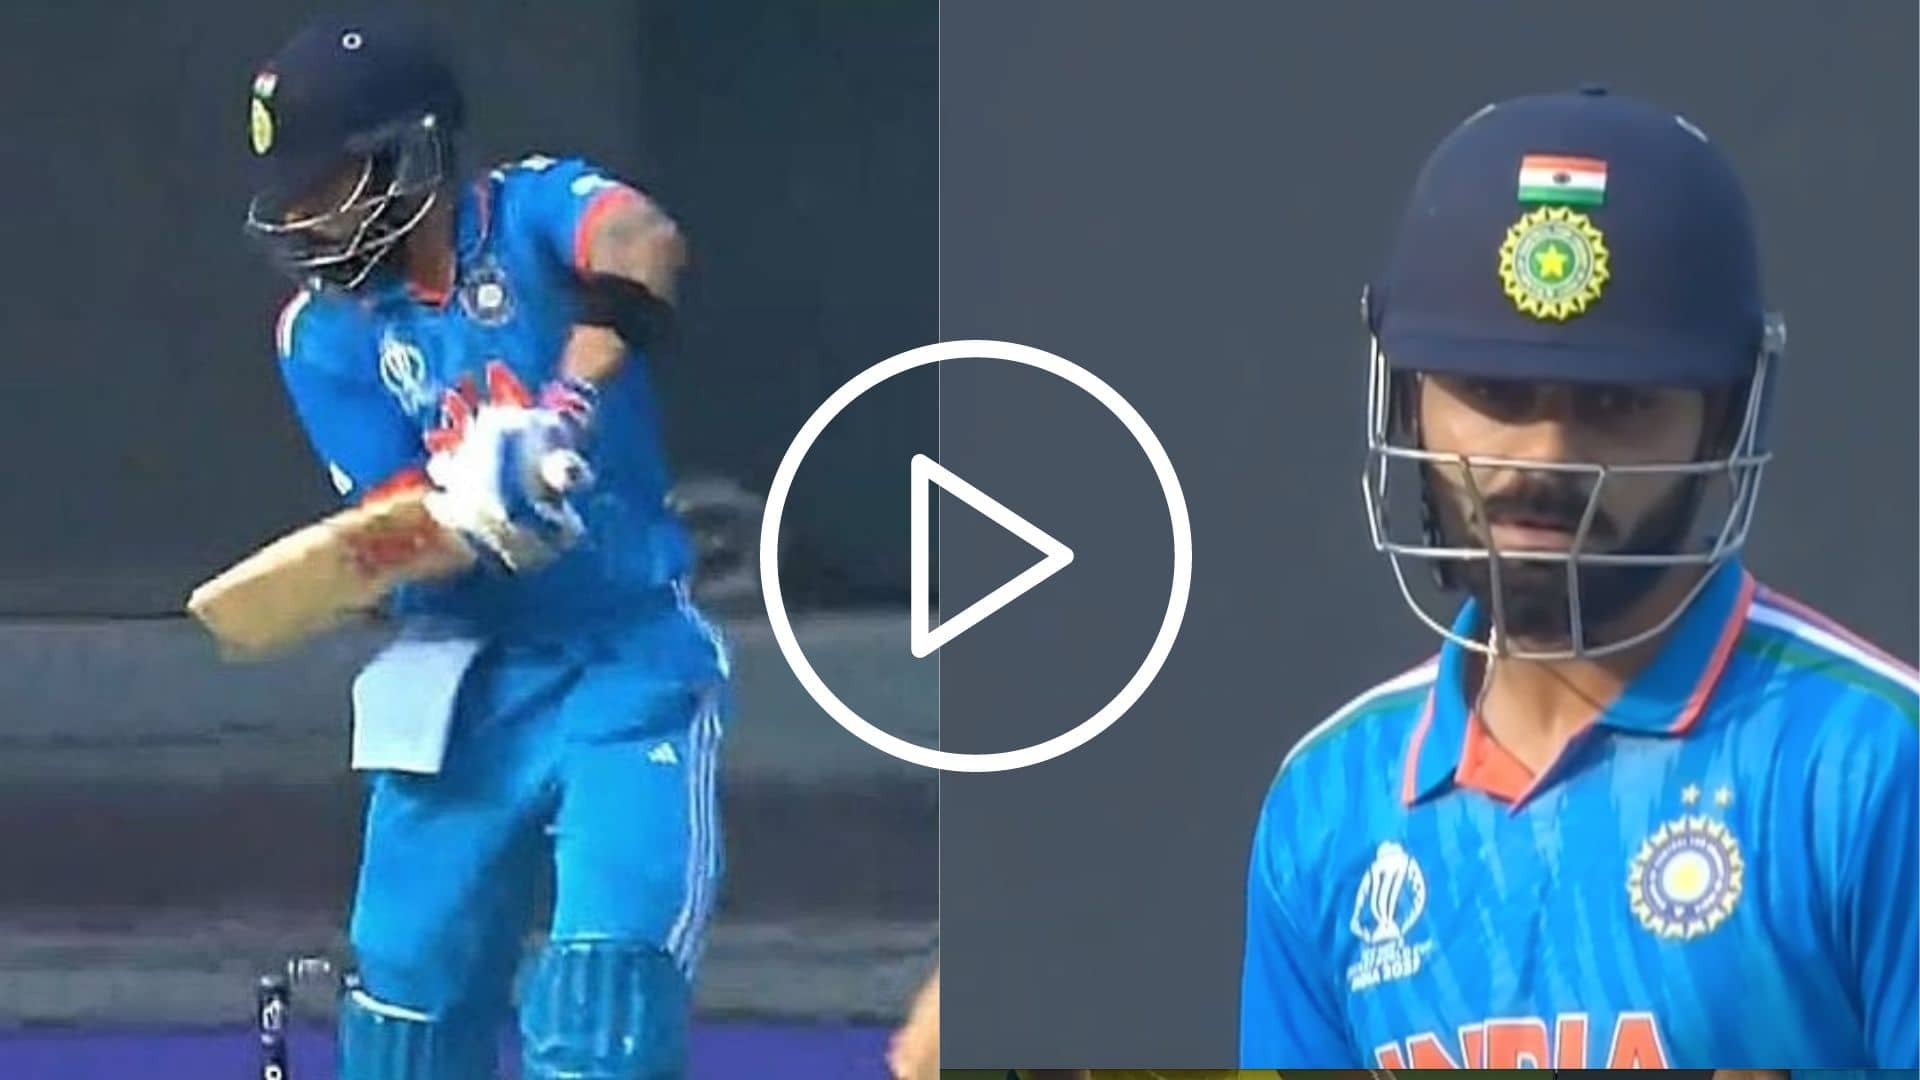 [Watch] Virat Kohli 'Shocked' After He Gets Cleaned Up By Cummins In World Cup Final